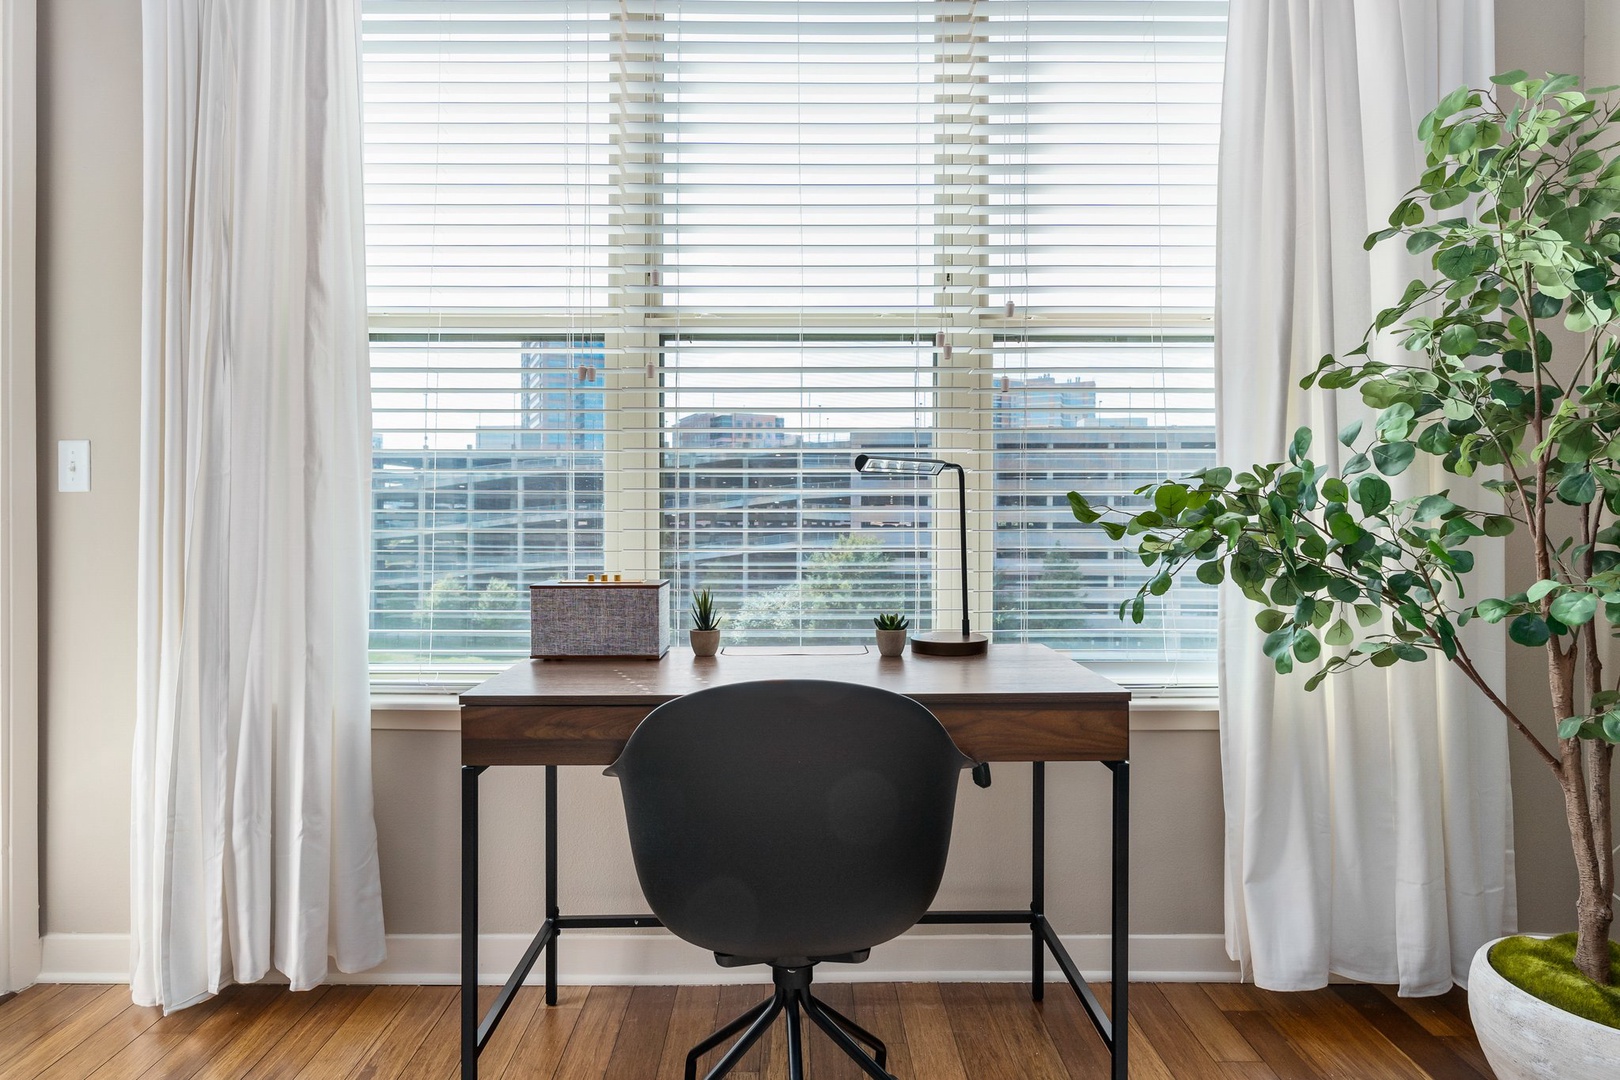 Stay productive in the dedicated desk area with ample natural light.